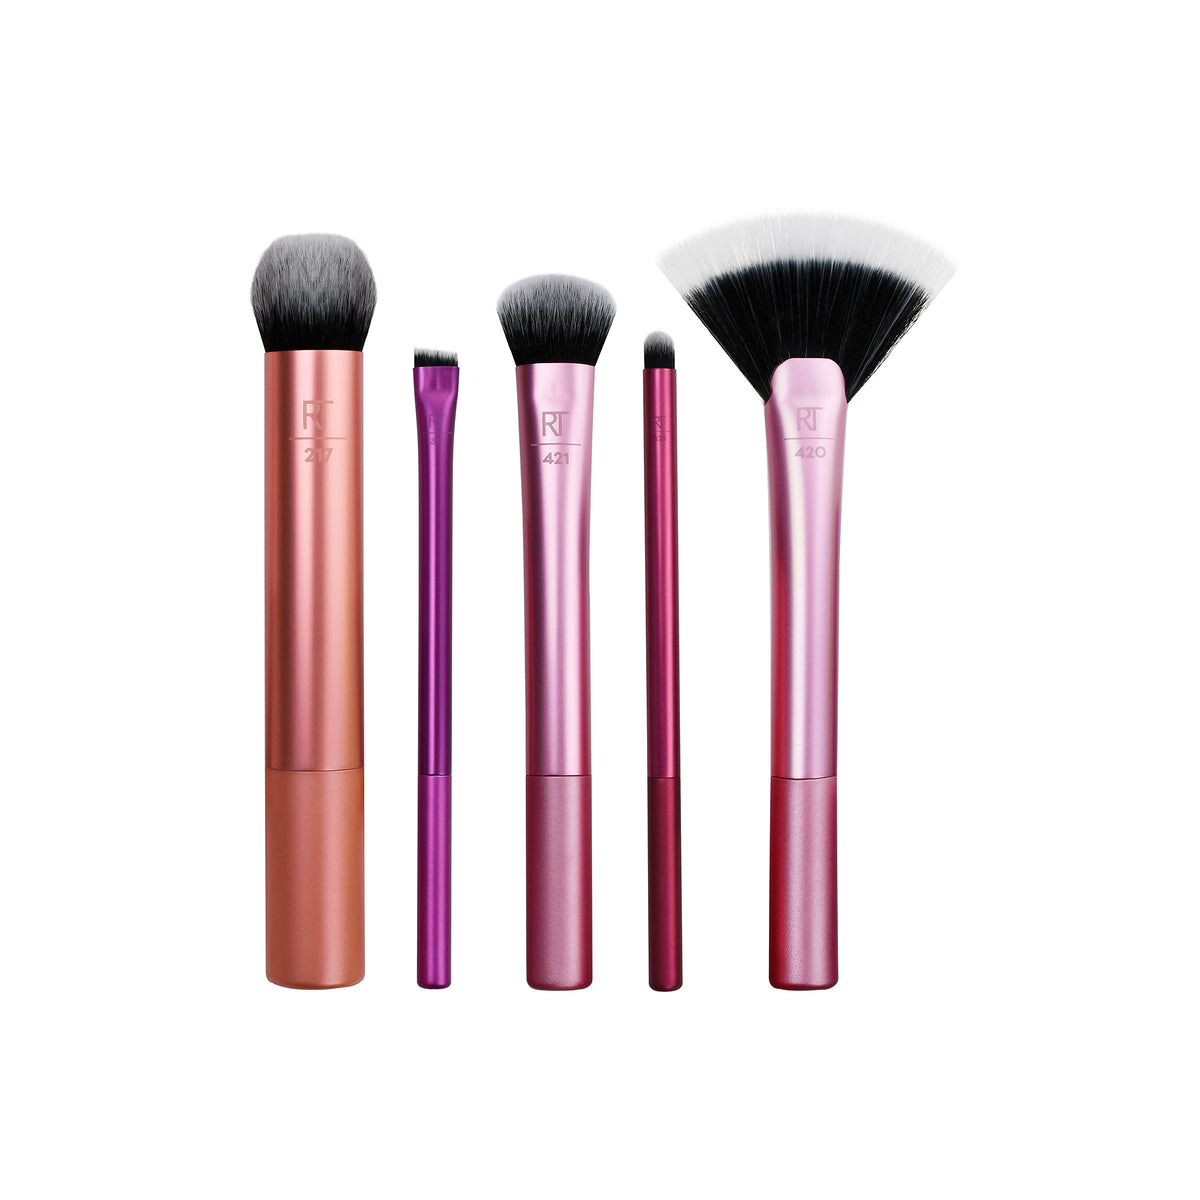 Real Techniques Everyday Essentials Brush Set (save 38%)